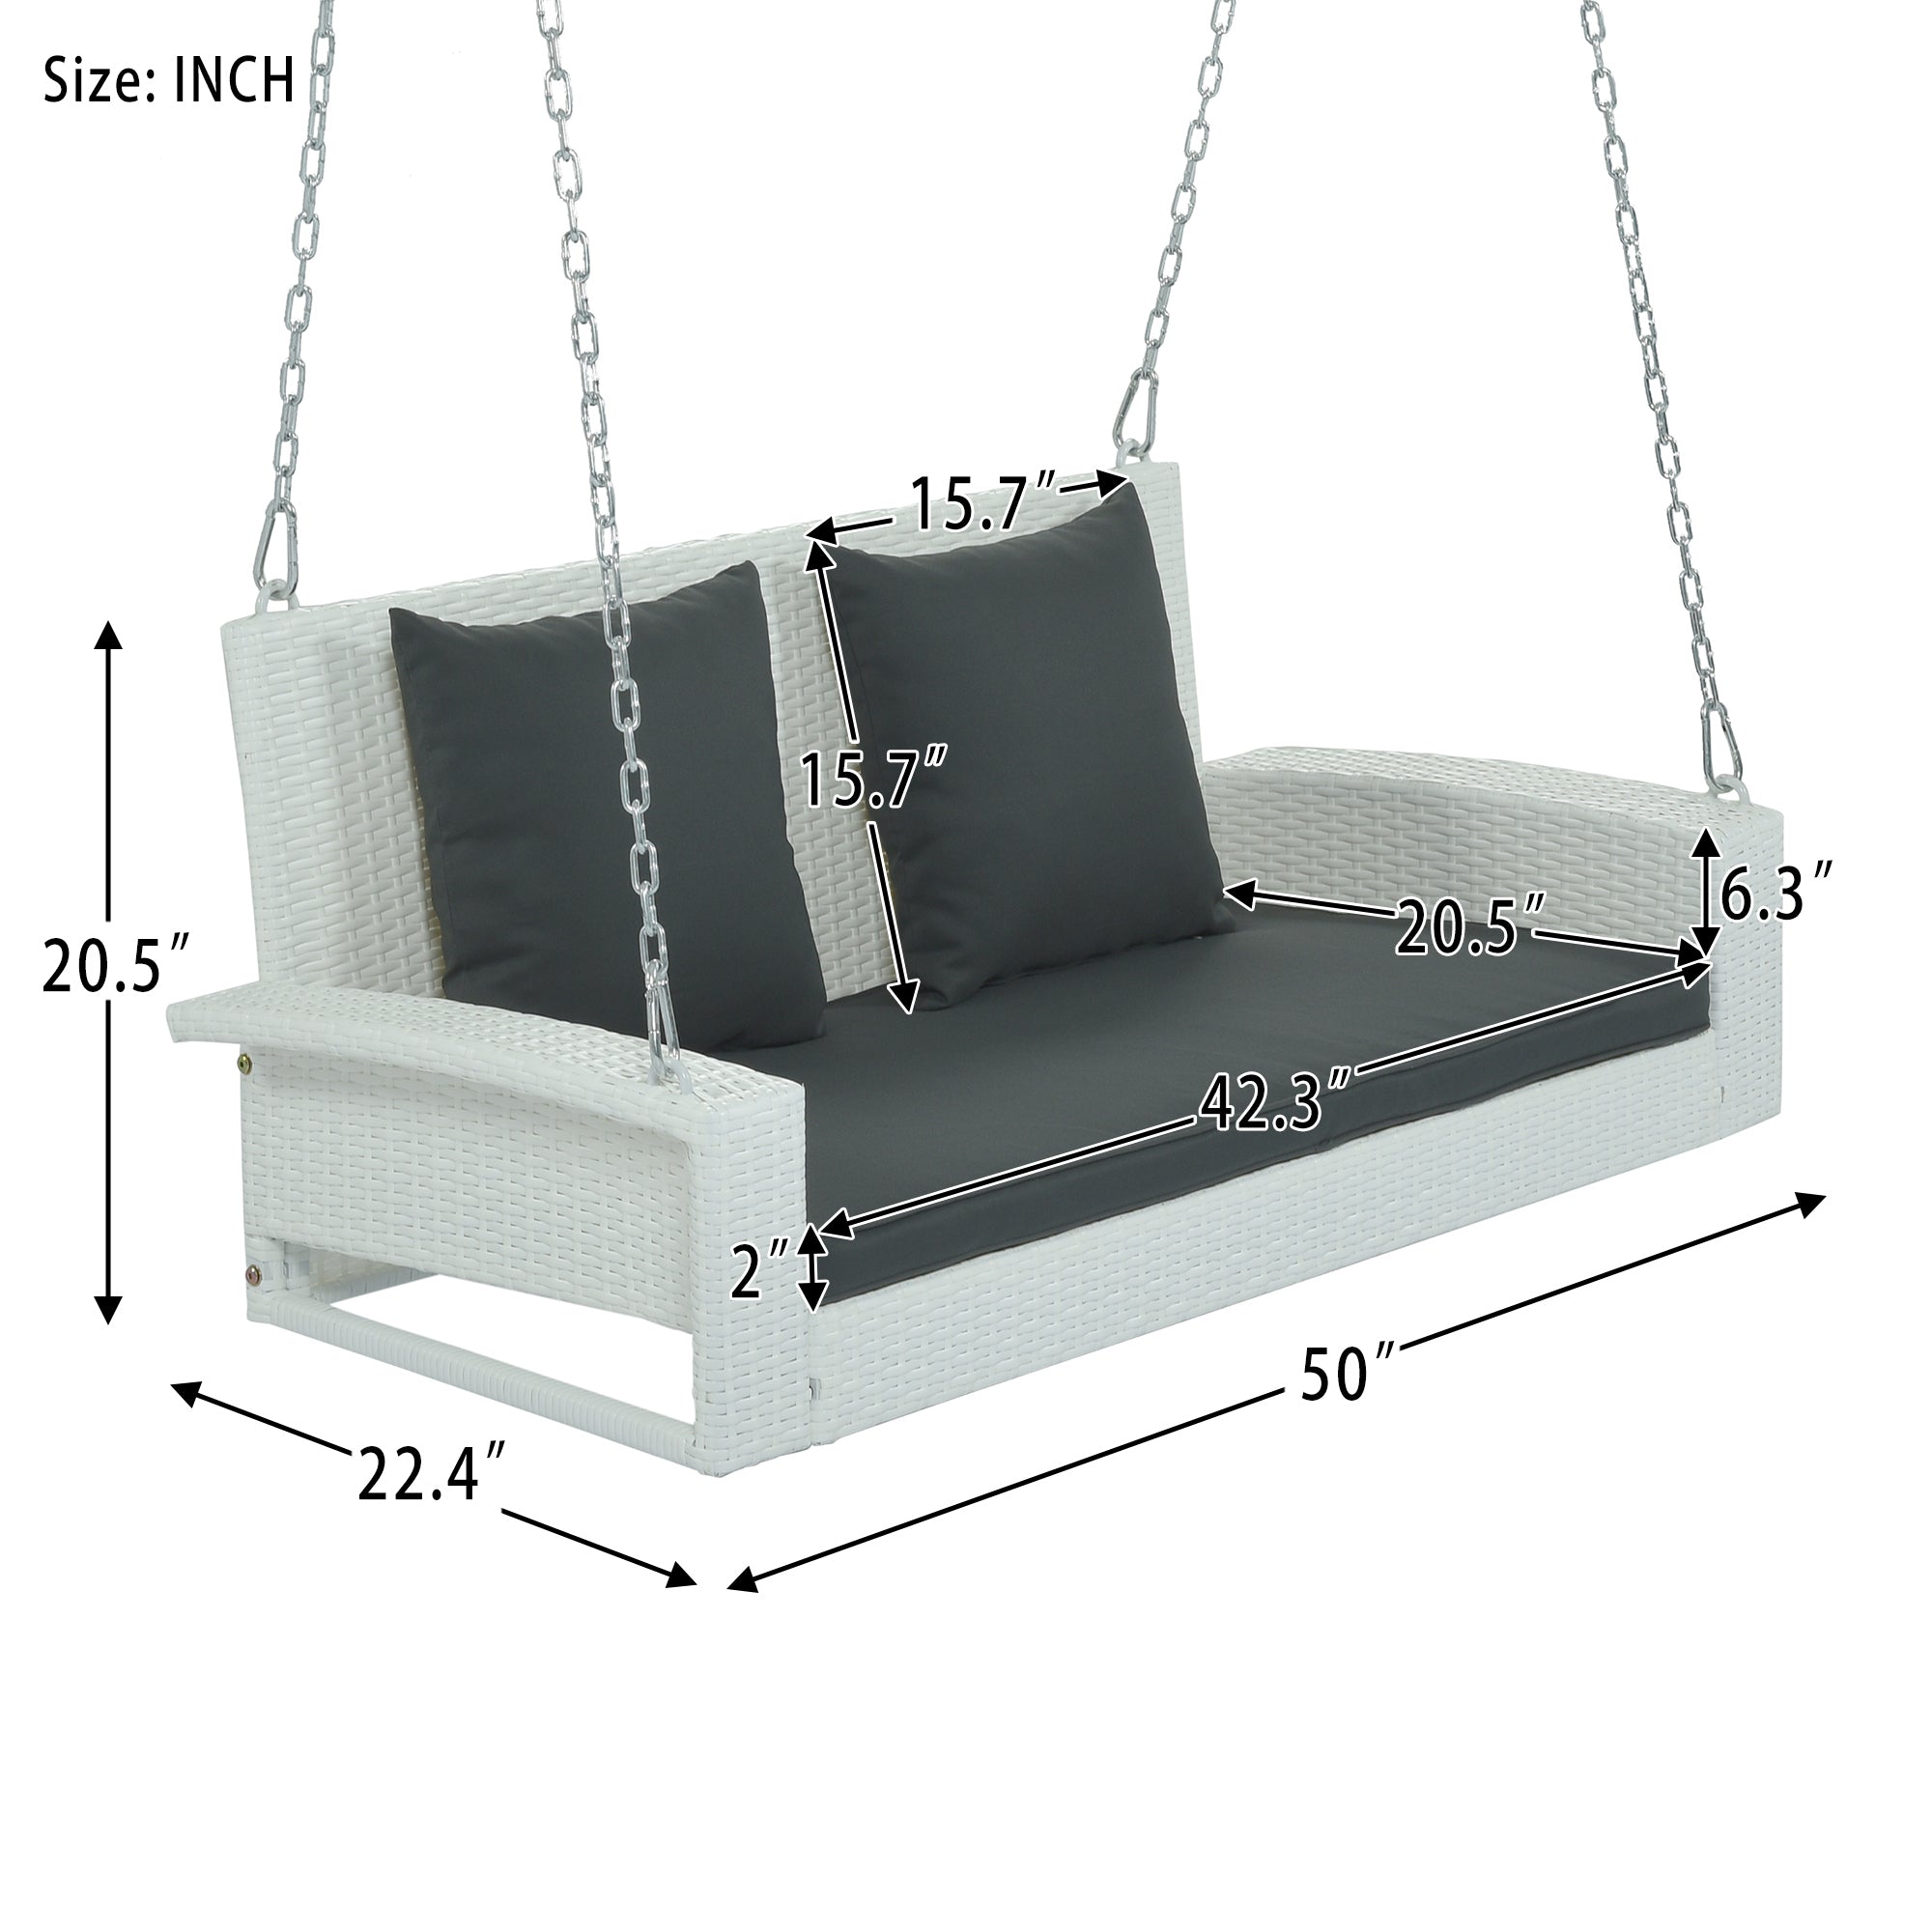 2-Person Wicker Hanging Porch Swing Bench with Chains, Cushion, Pillow